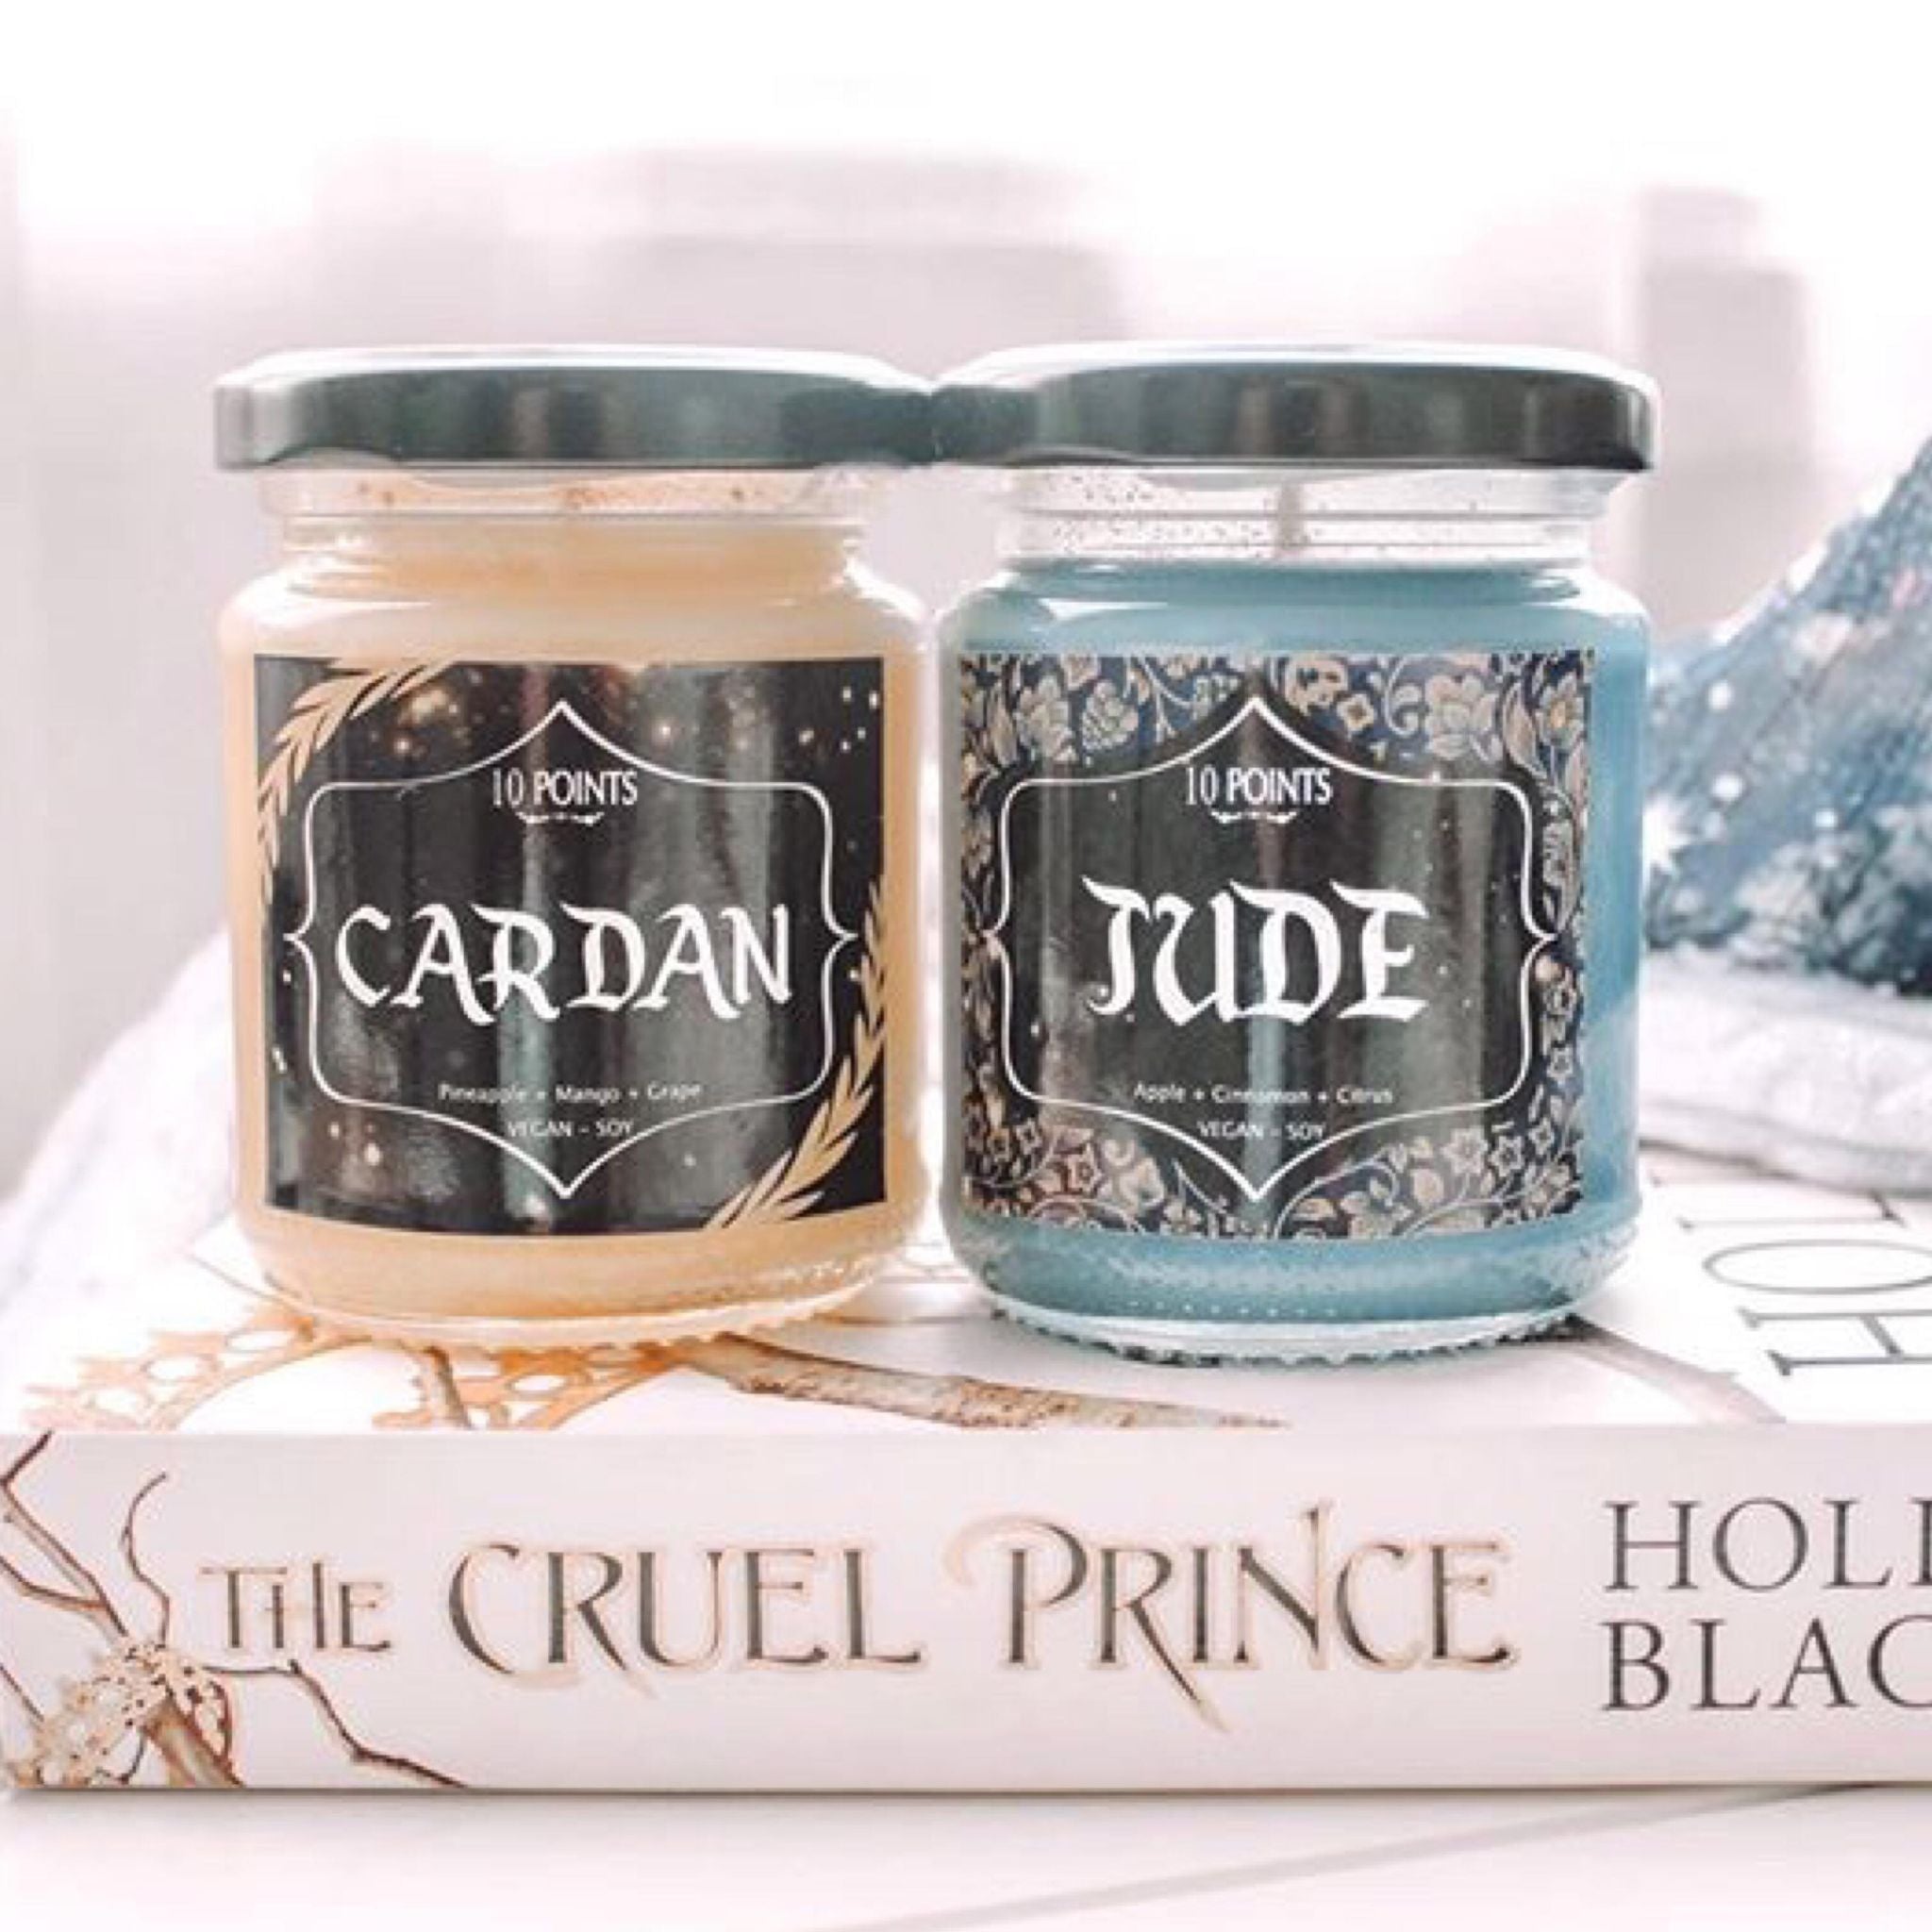 Jude - Book Inspired Soy Candle Scent Notes: Apple, Cinnamon & Citrus